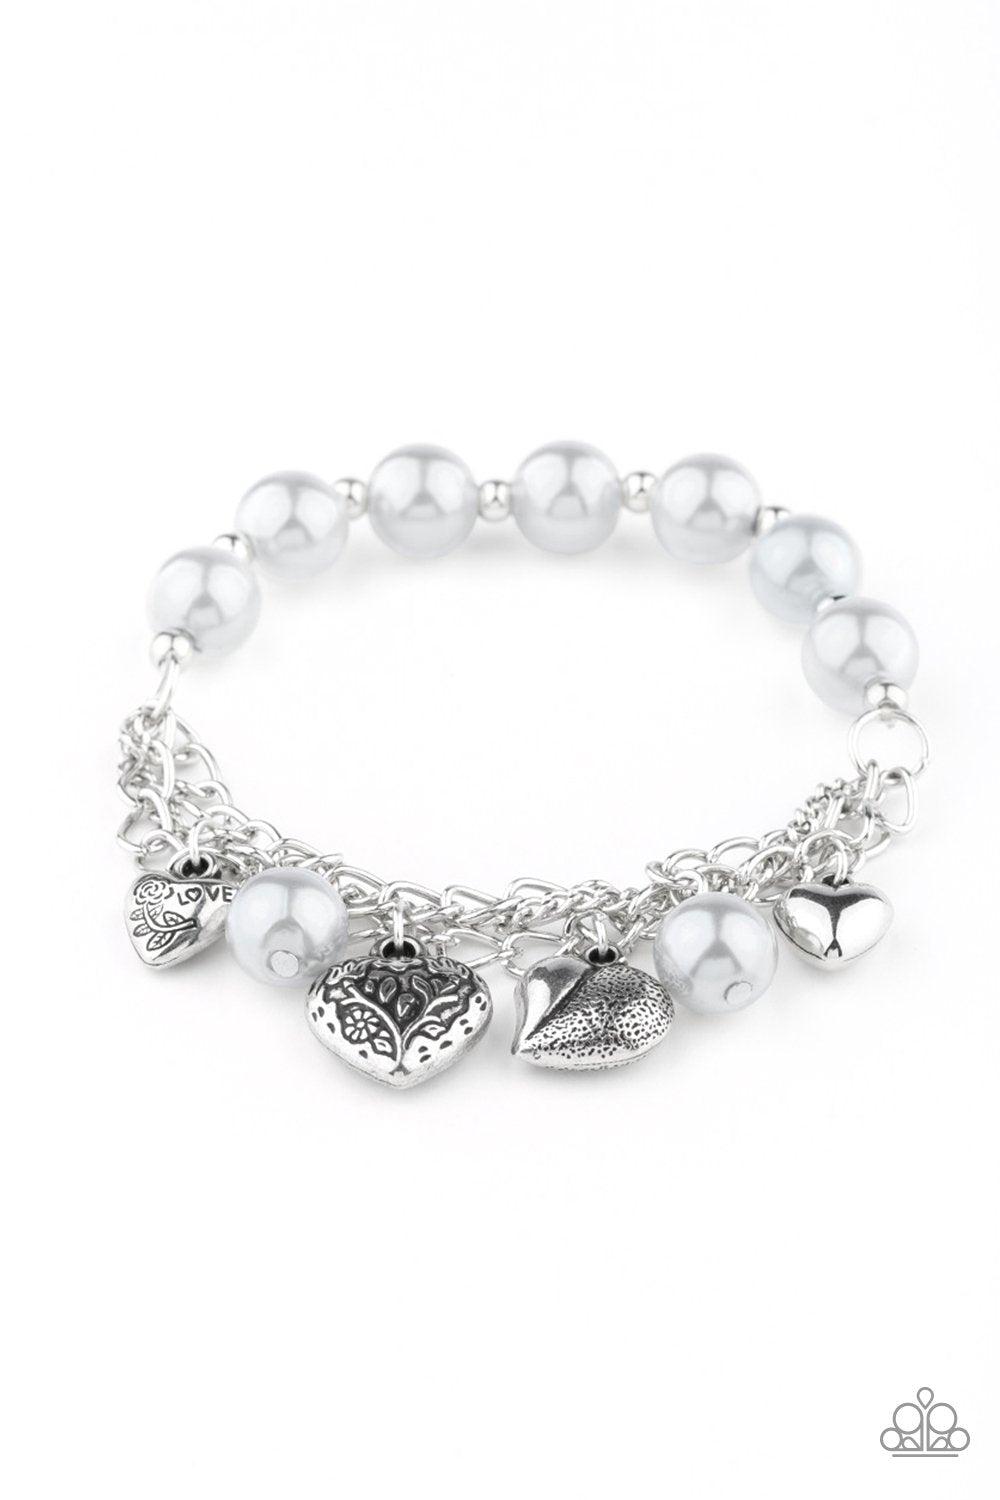 More Amour Silver Heart Stretch Bracelet - Paparazzi Accessories-CarasShop.com - $5 Jewelry by Cara Jewels